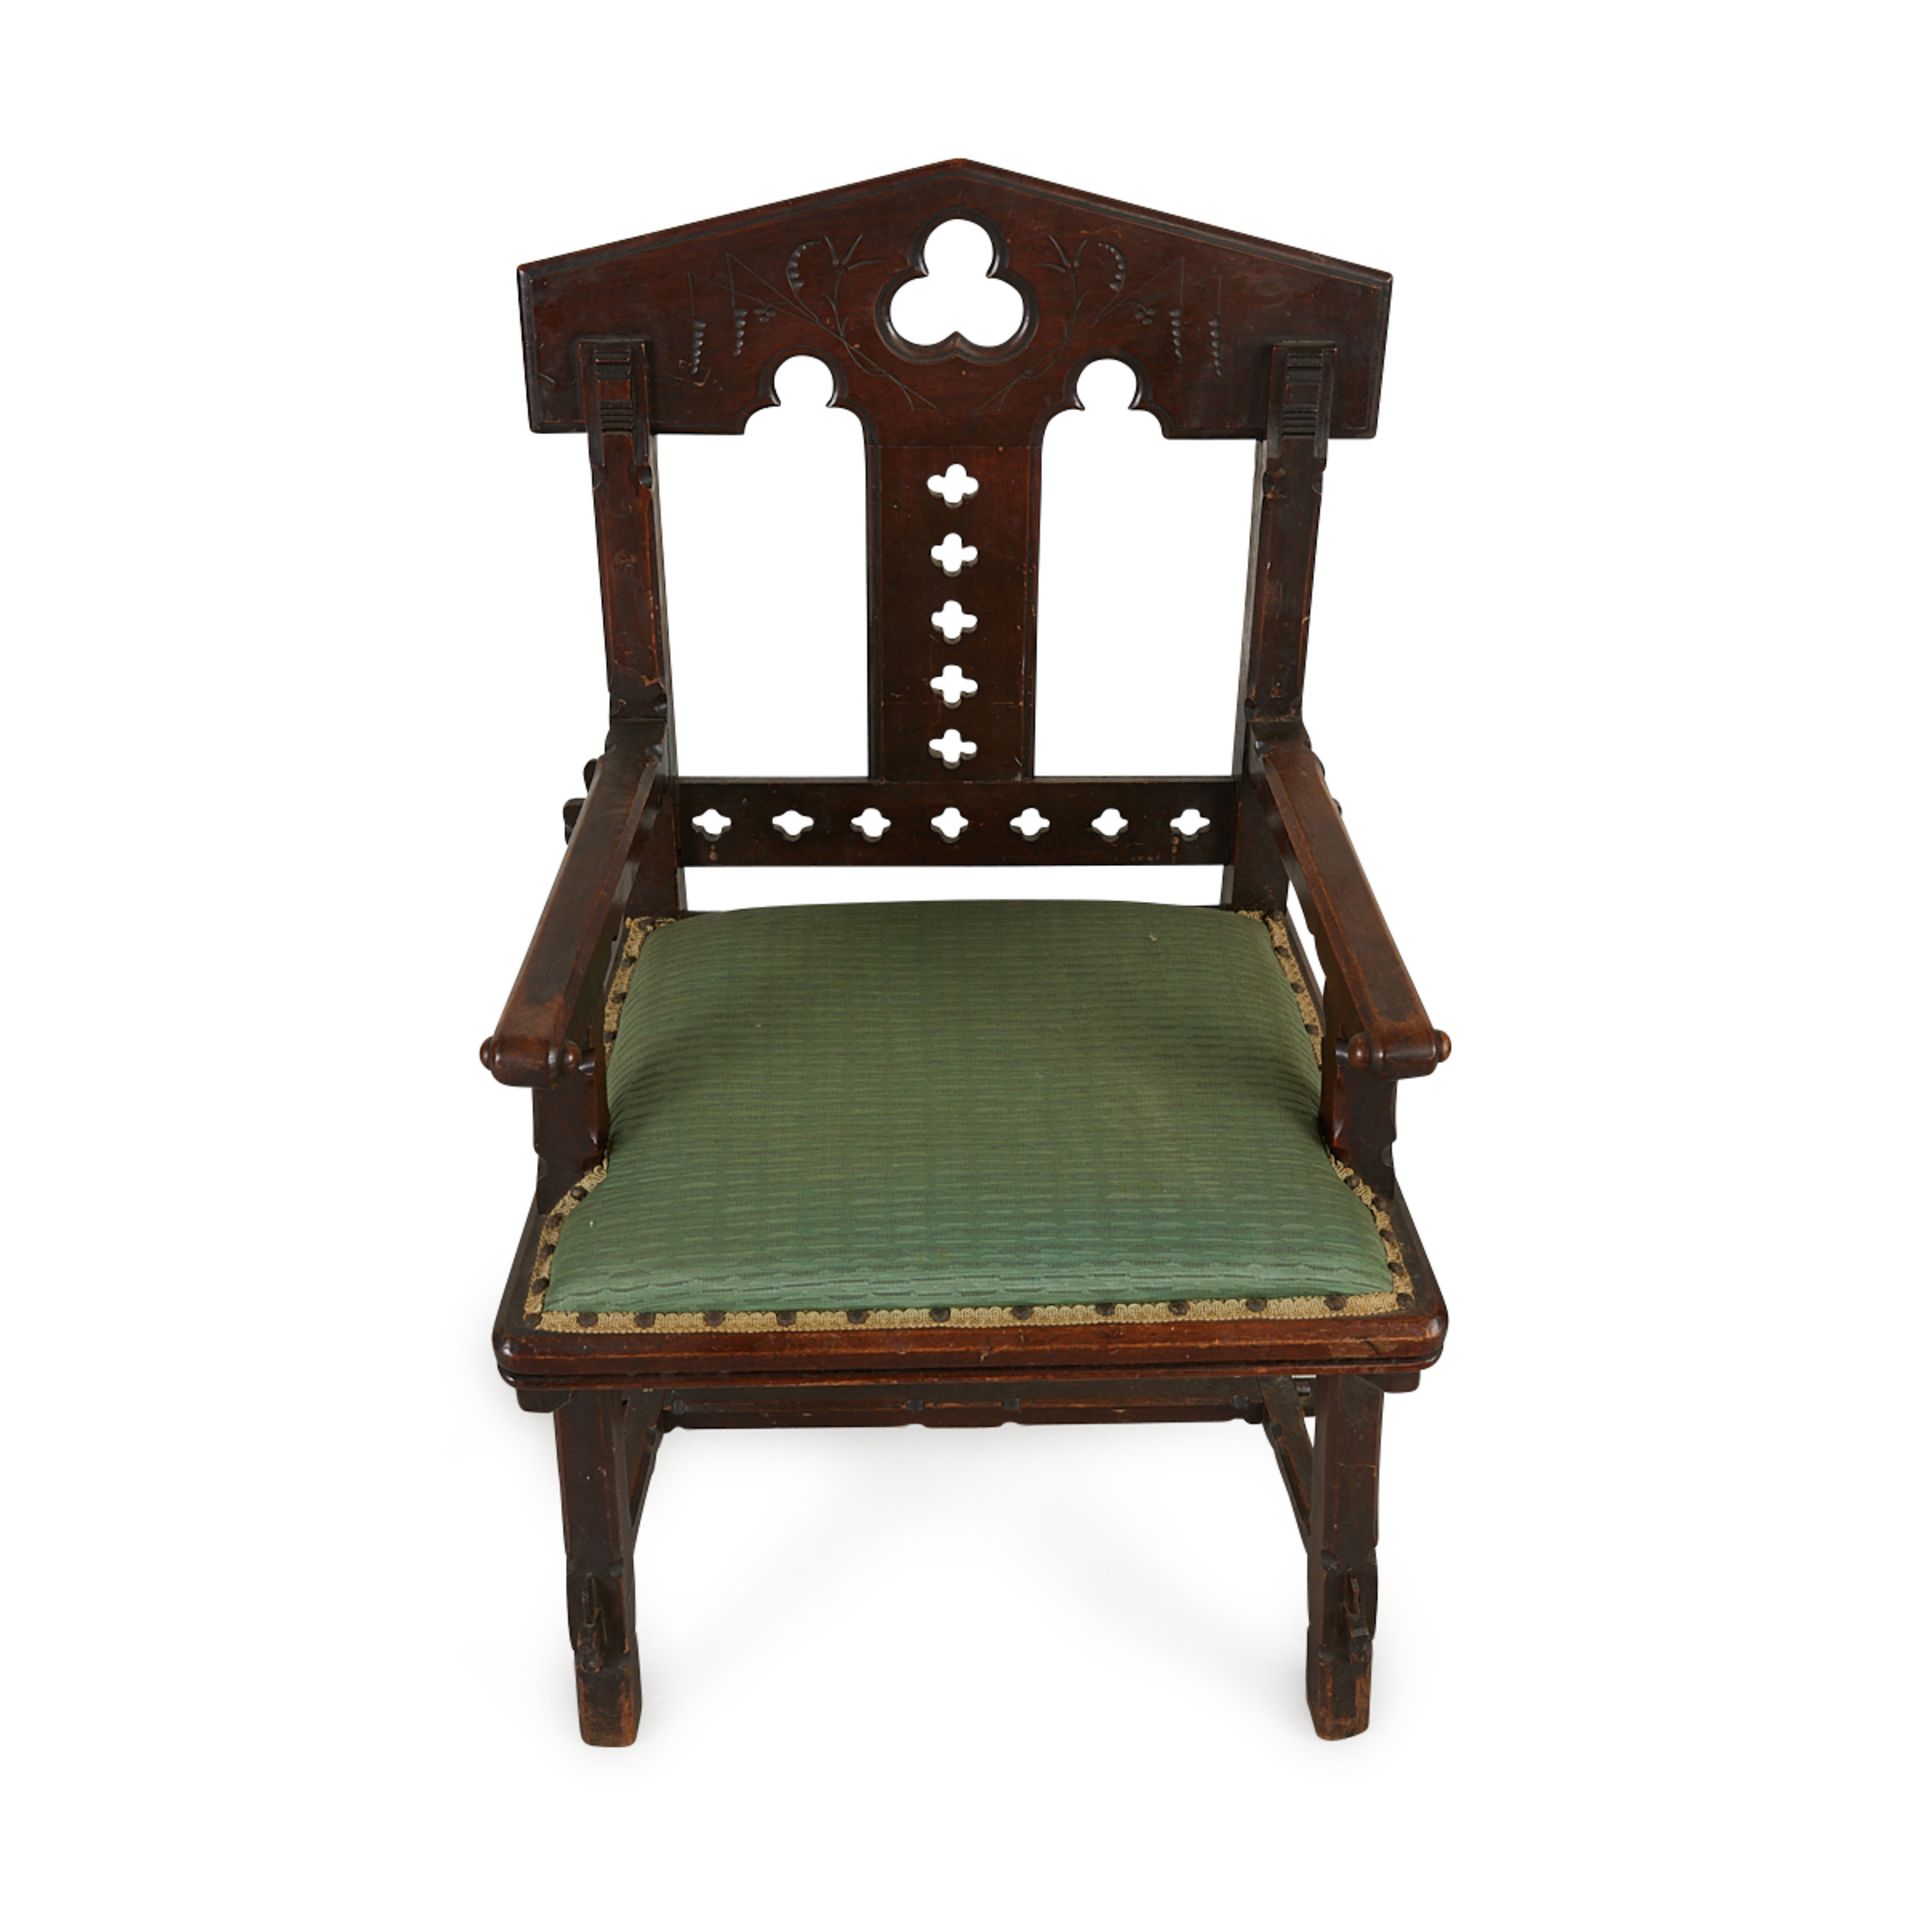 Aesthetic Movement Gothic Walnut Chair ca. 1875 - Image 9 of 11